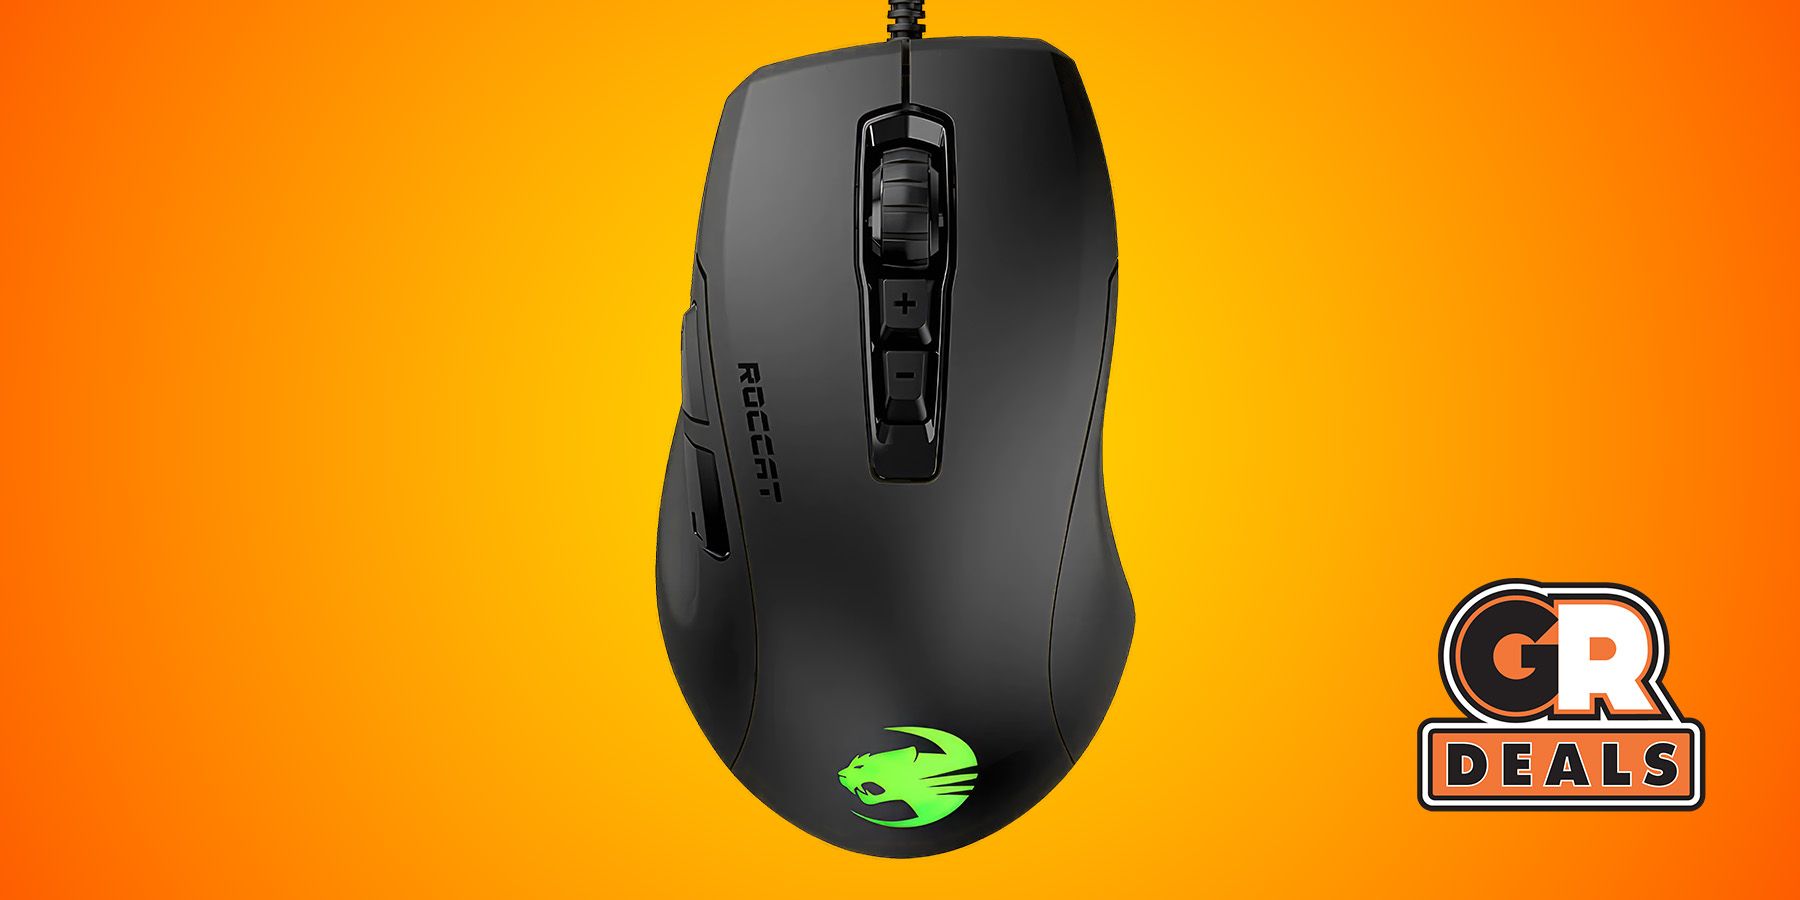 Your Gaming Potential with Logitech G PRO Mouse at a Steal!